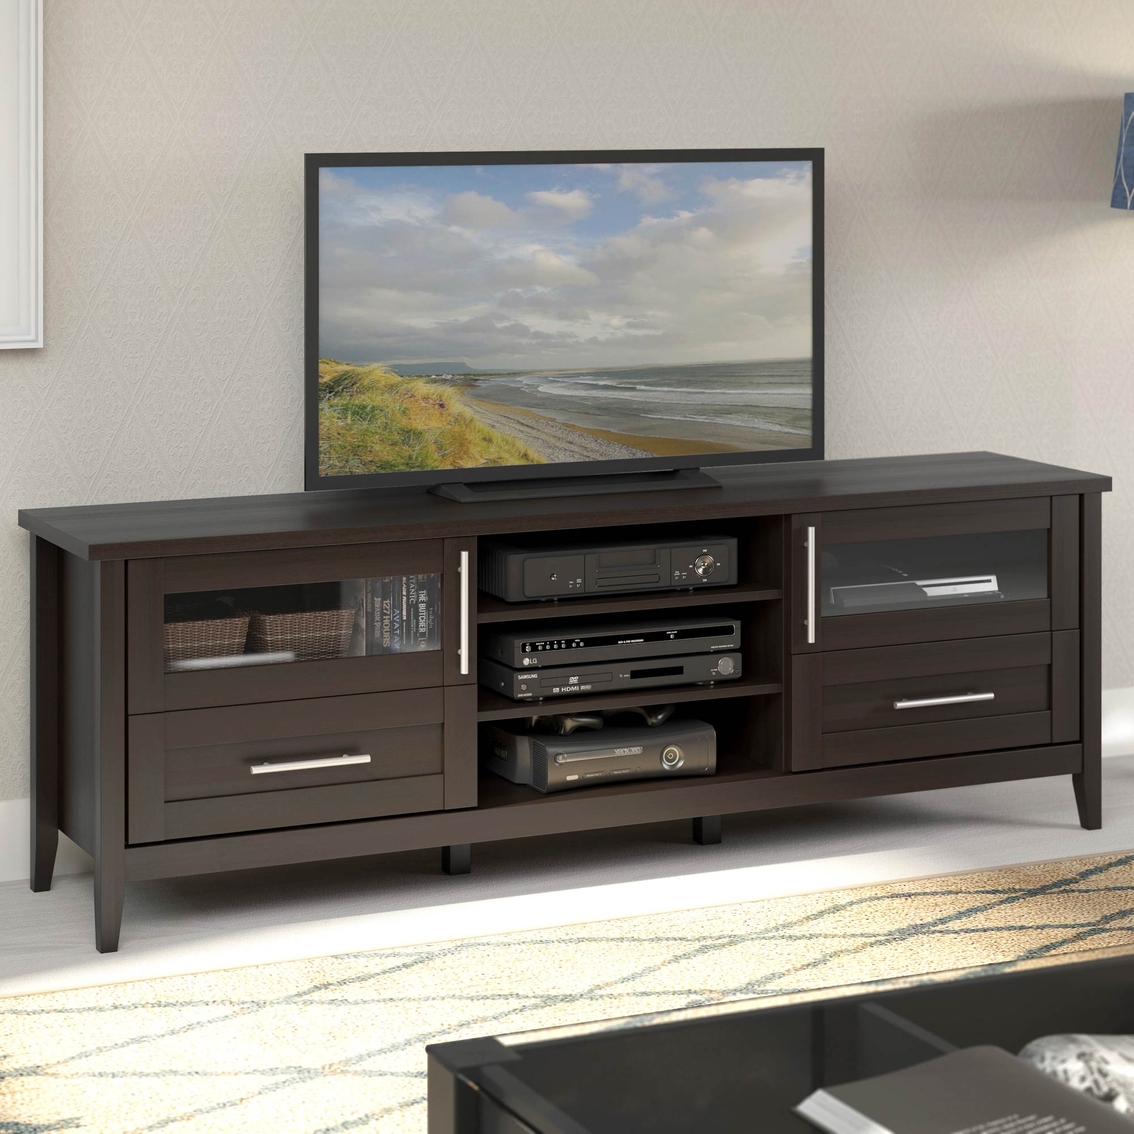 CorLiving Jackson Extra Wide TV Bench for TVs up to 80 in. - Image 3 of 3